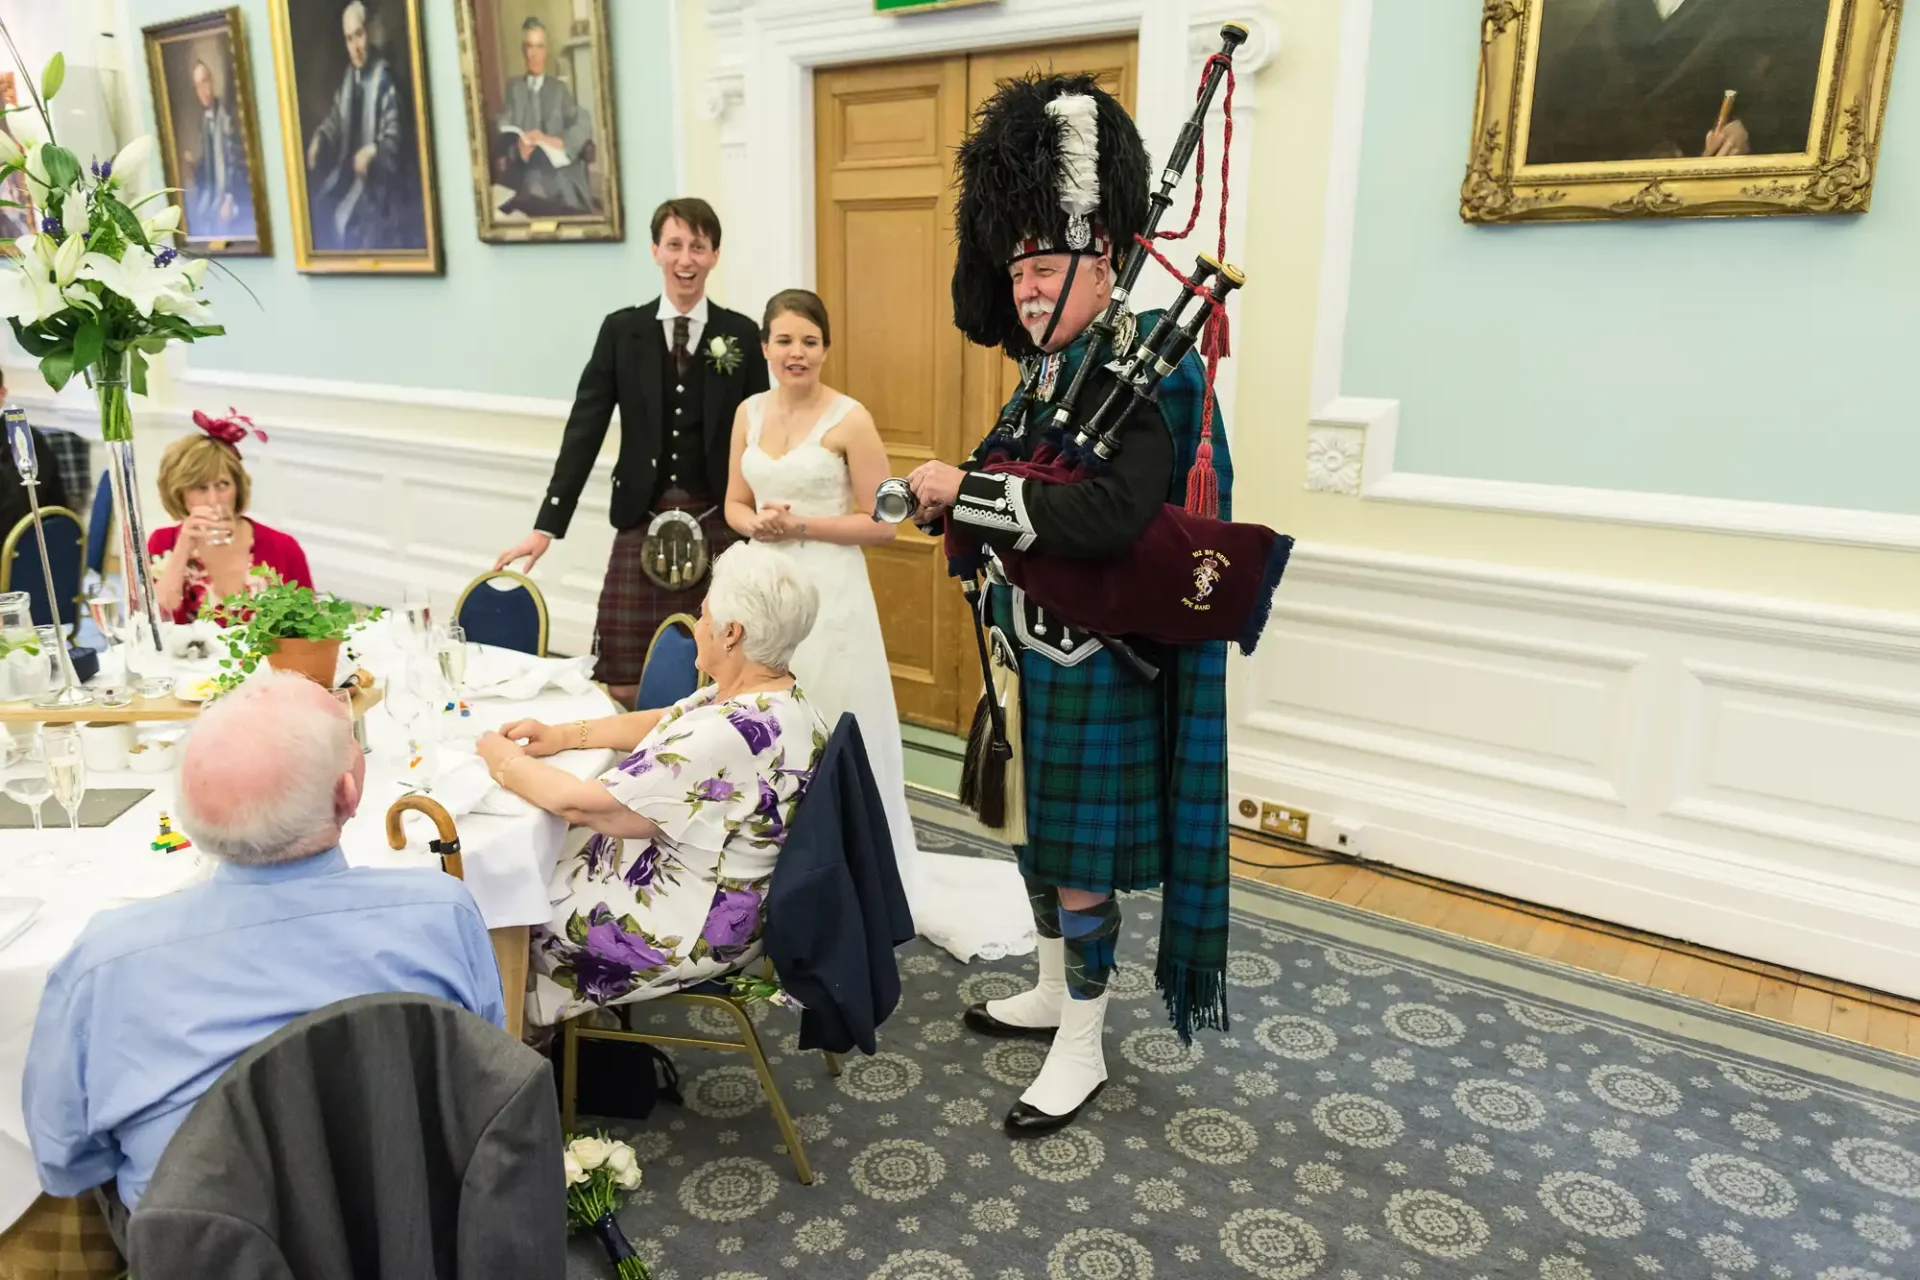 A bagpiper in traditional scottish attire plays at a wedding reception in an ornate room while guests watch.